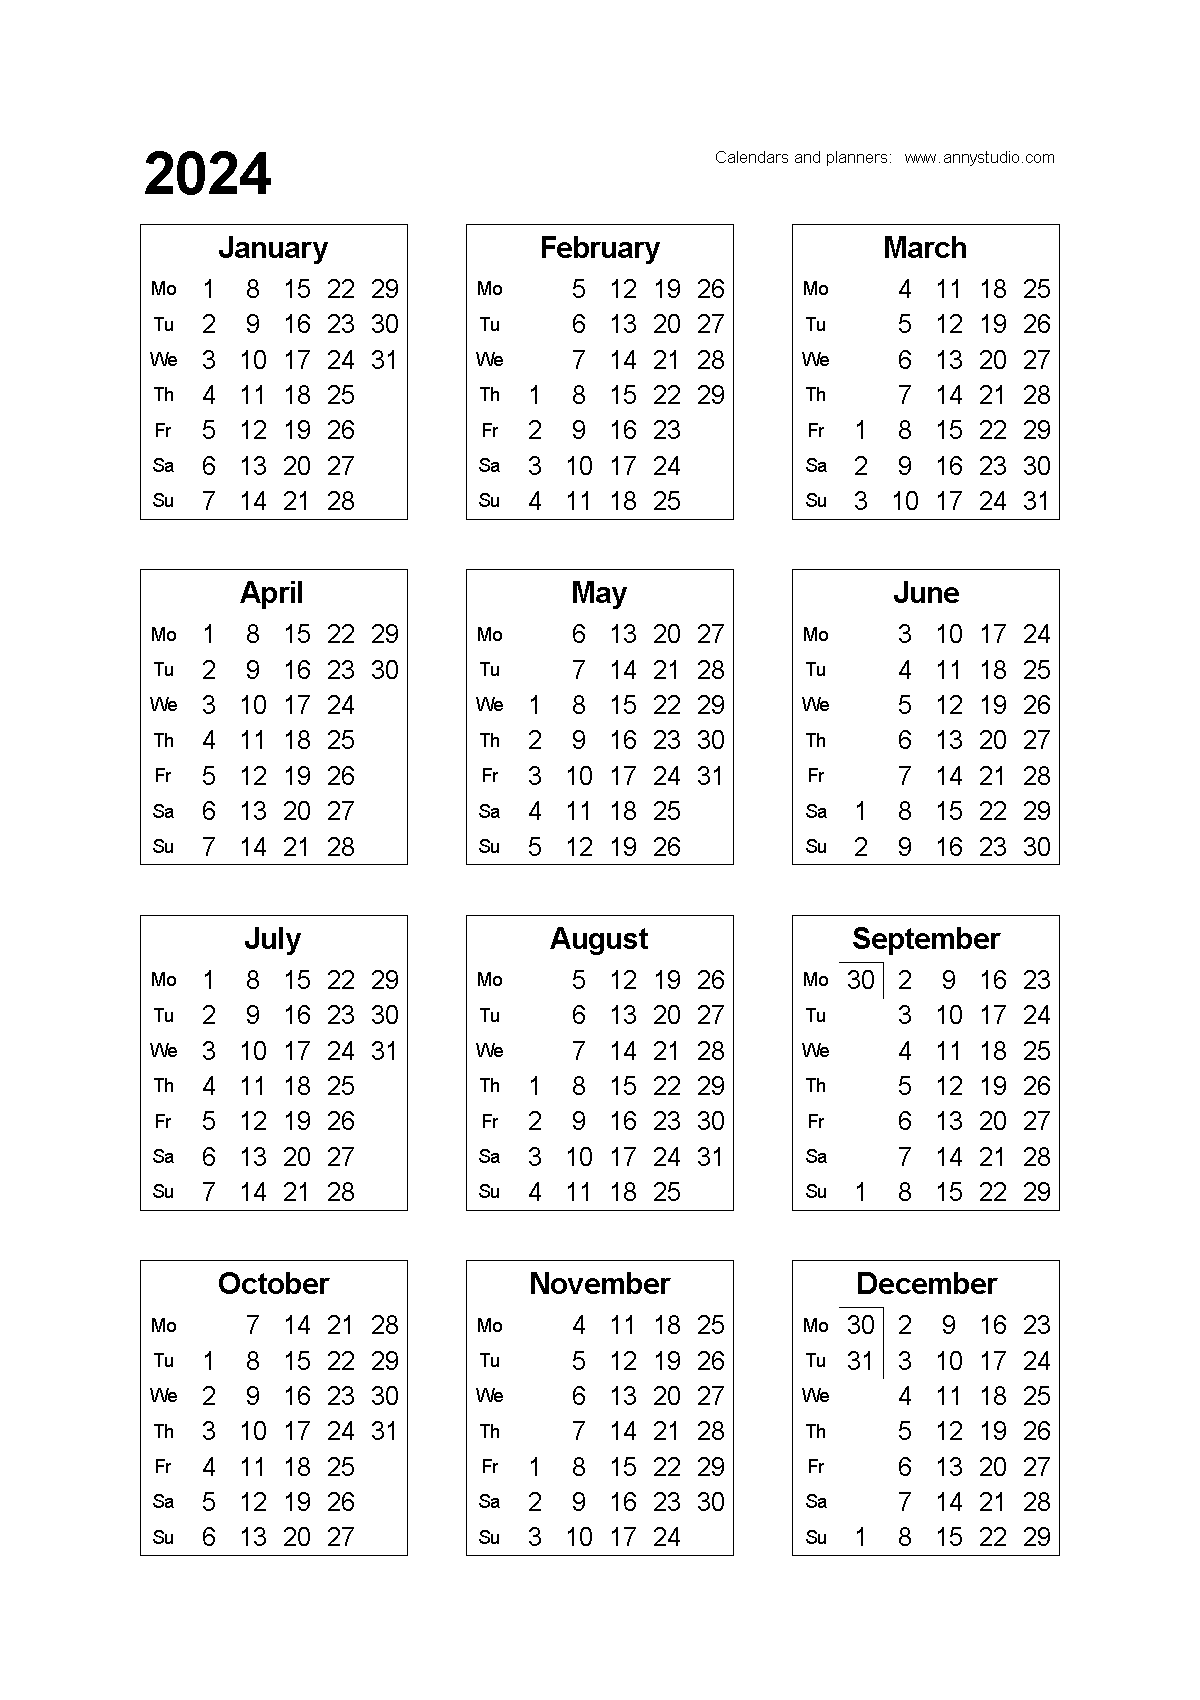 Free Printable Calendars And Planners 2024, 2025 And 2026 inside Free Printable Calendar 2024 A4 Size